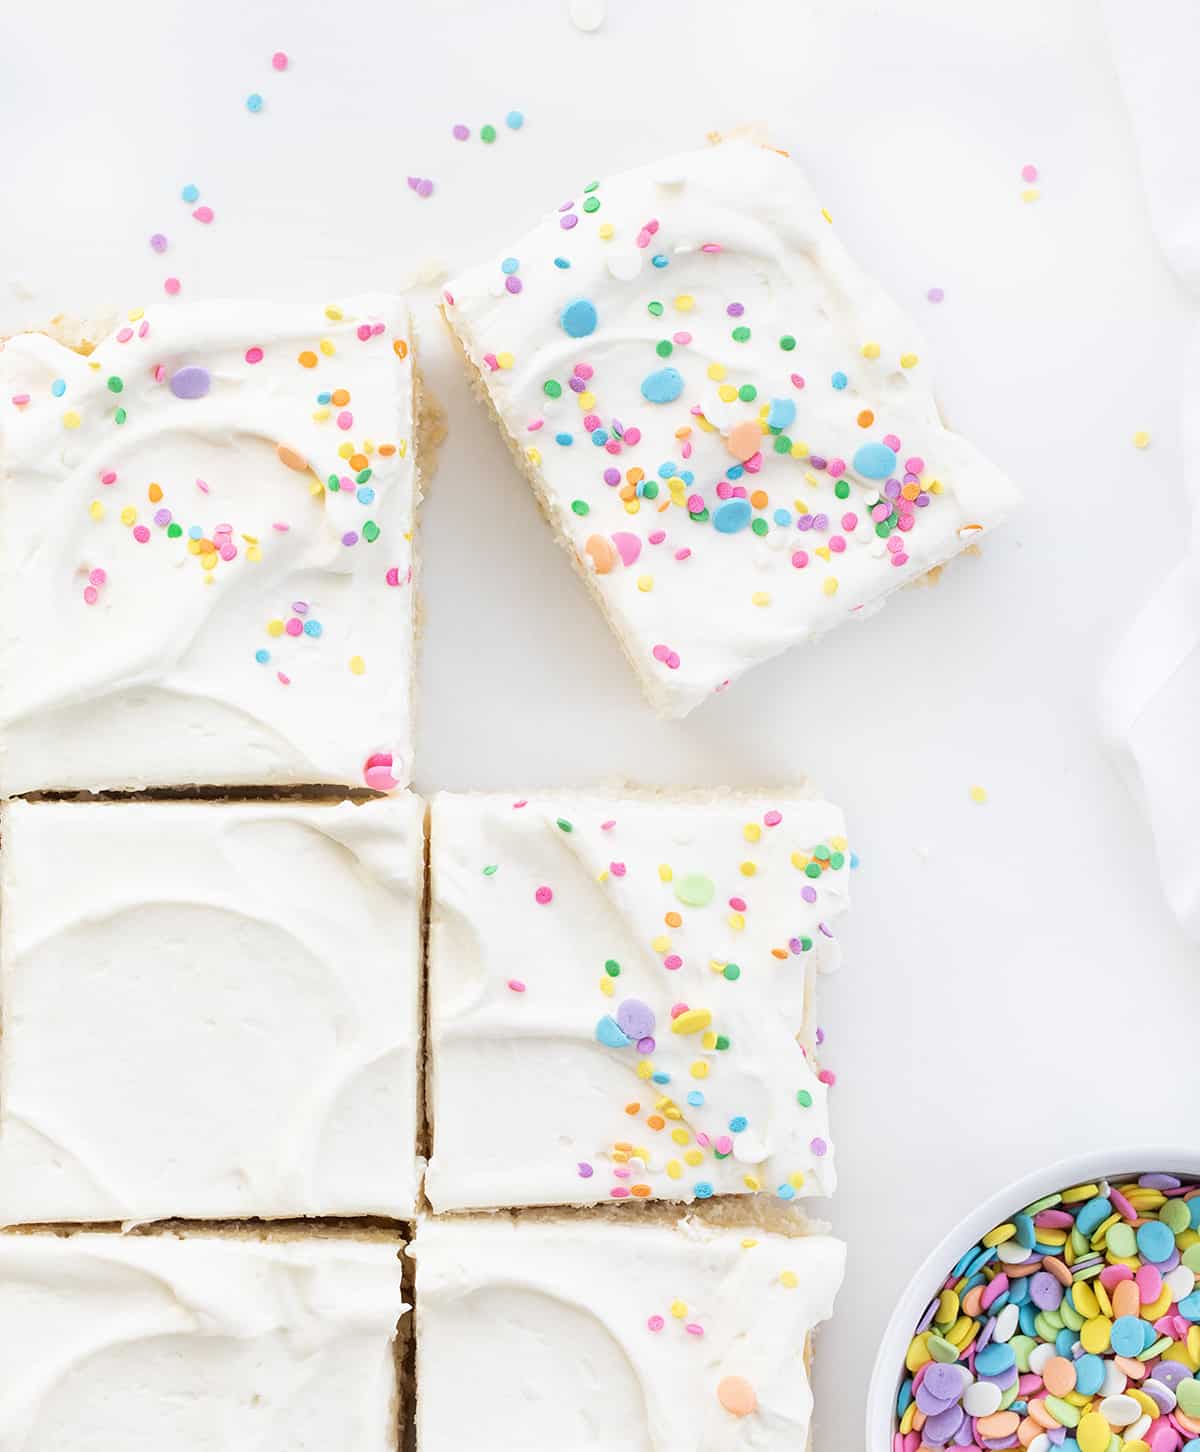 Pieces of Vanilla-Delight Cake or White Cake on a Counter with Pastel Colored Sprinkles.